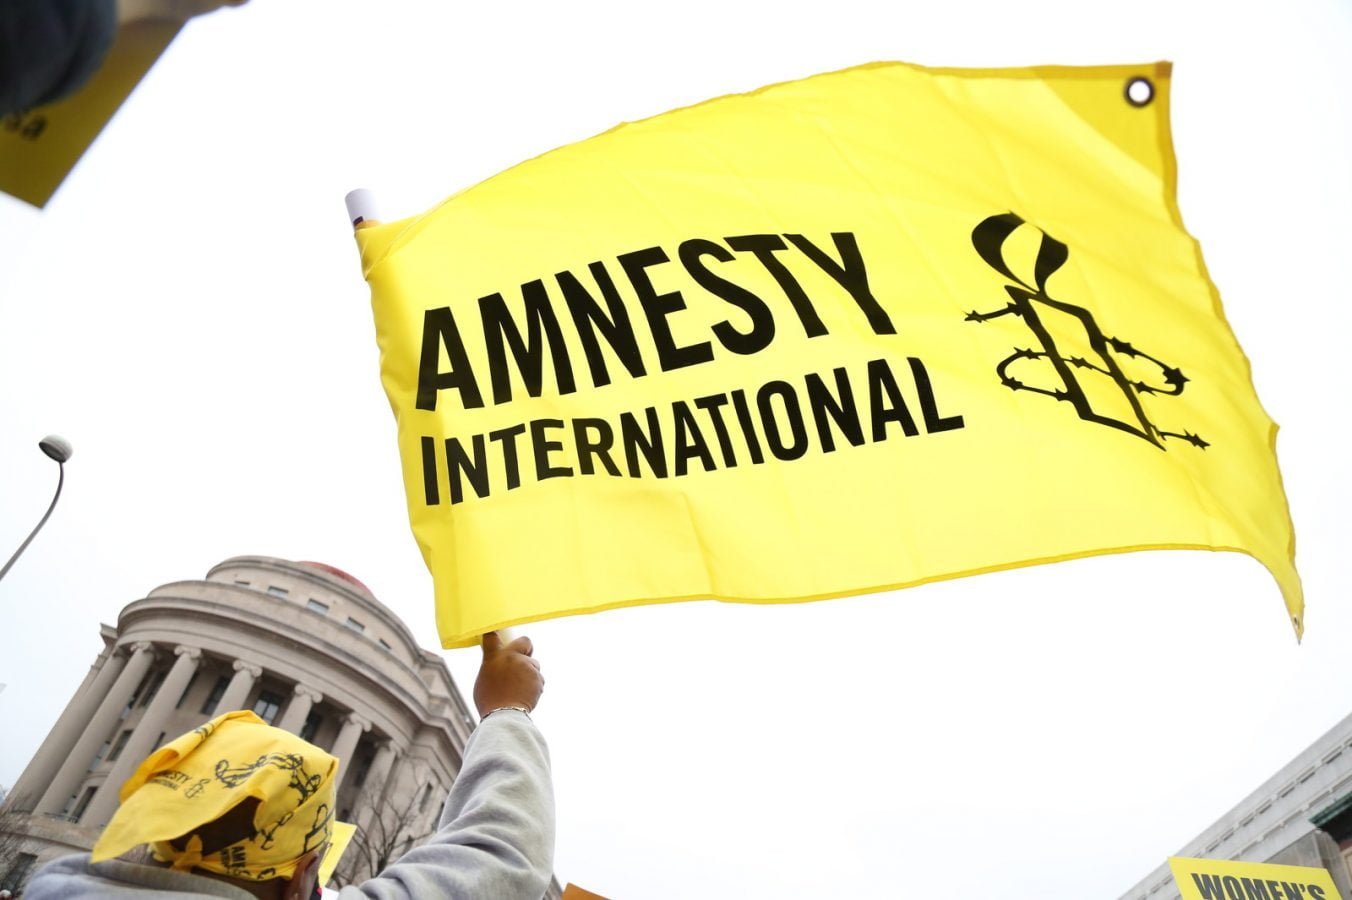 Image of a yellow and black flag, featuring the Amnesty International logo, being waved.